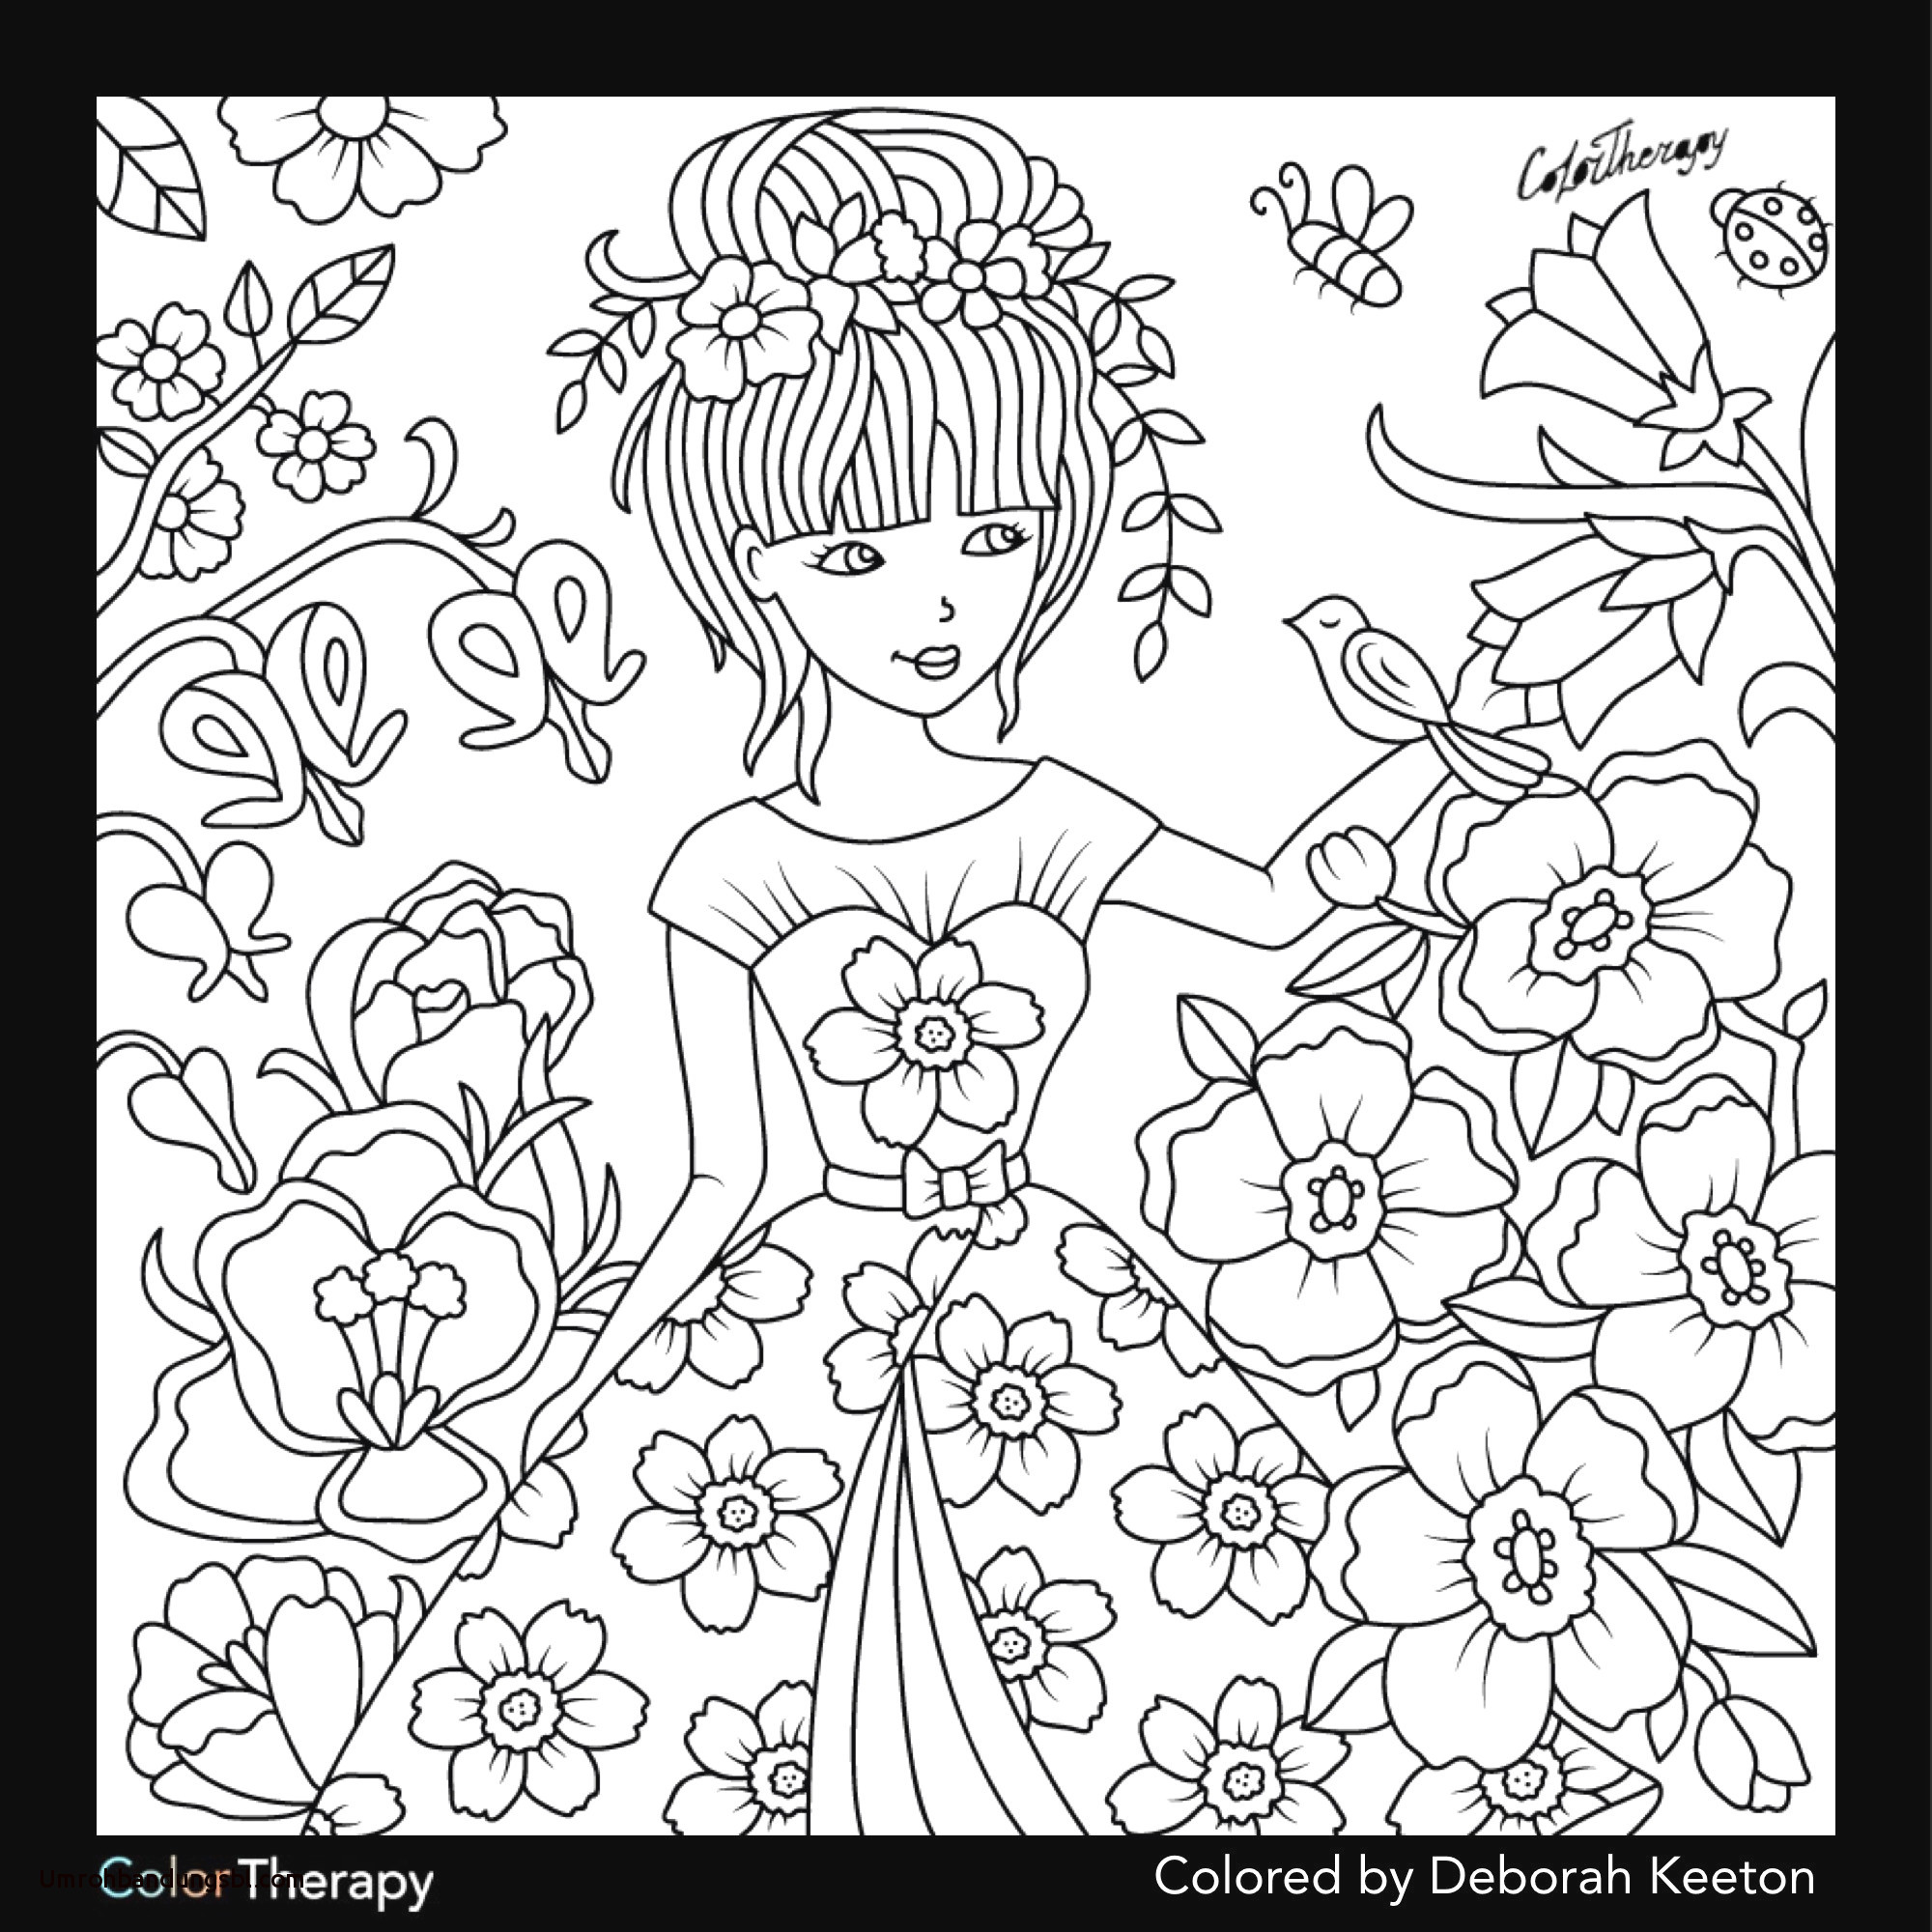 20 Cute New Beetle Flower Vase 2024 free download new beetle flower vase of cloud9vegas unique art coloring pictures www picturesboss com for lego captain america coloring unique america coloring pages cloud vegas of lego captain america co